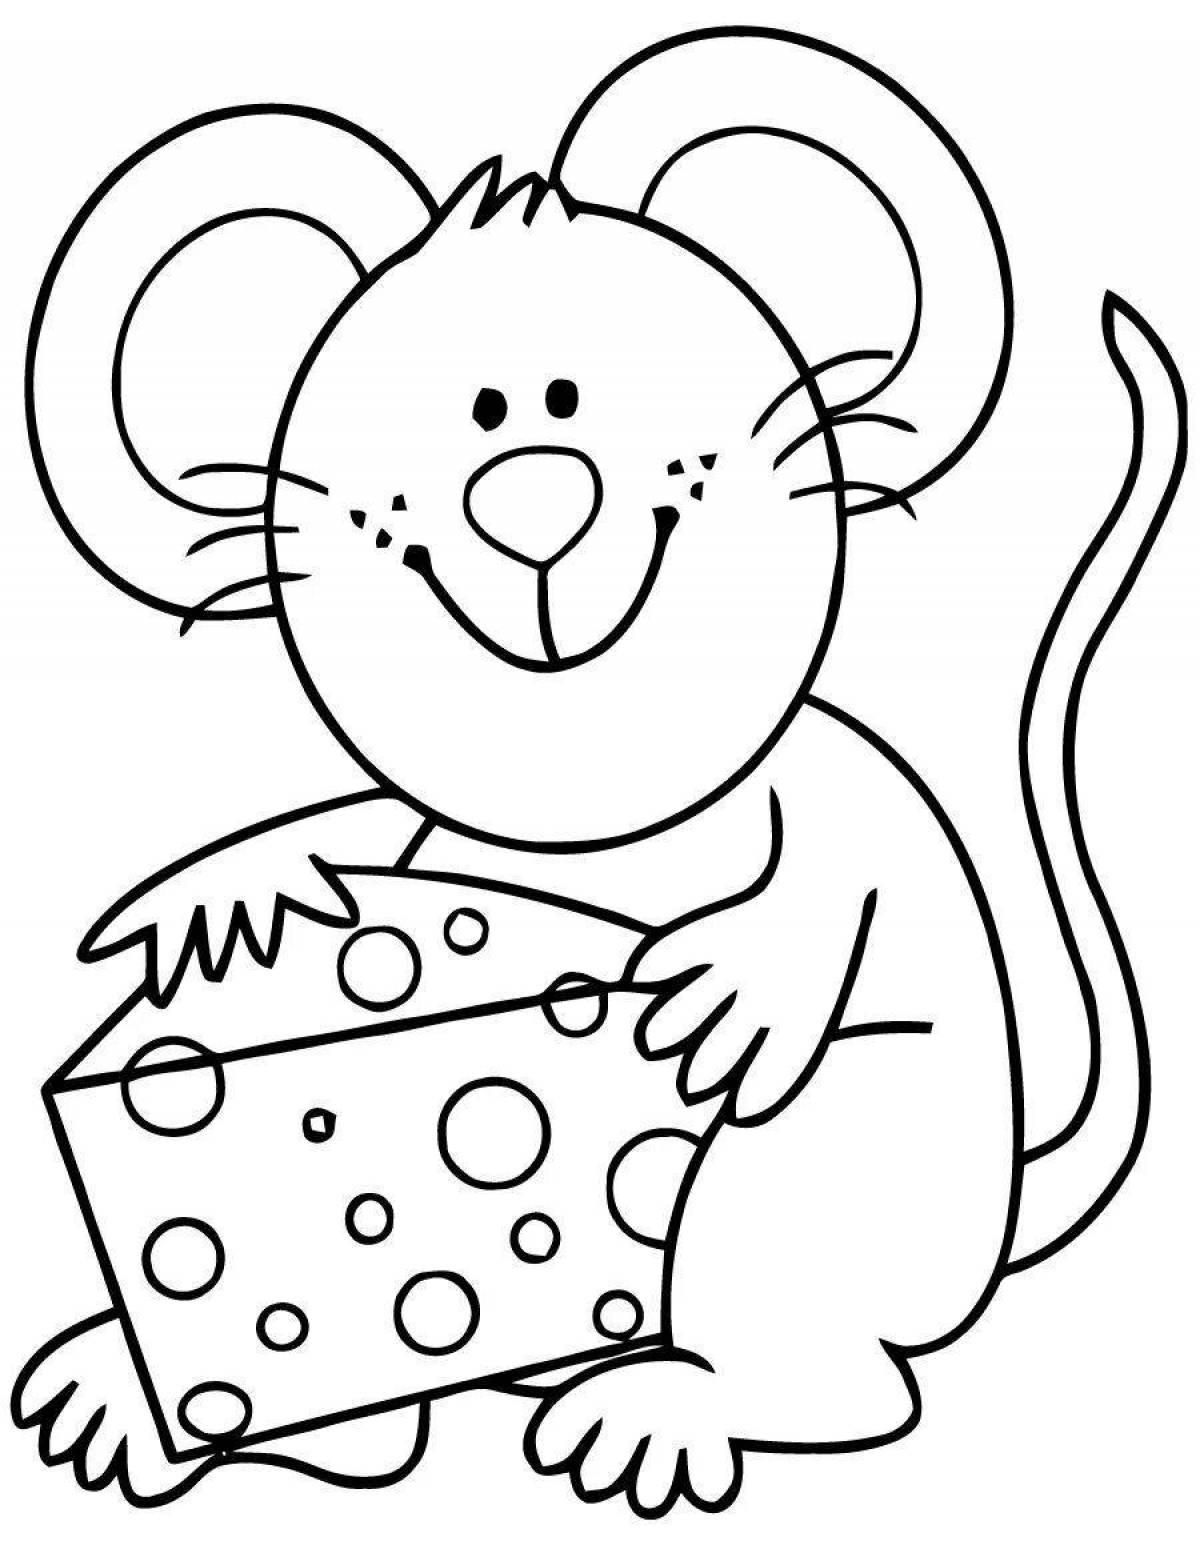 Coloring book funny mouse tim